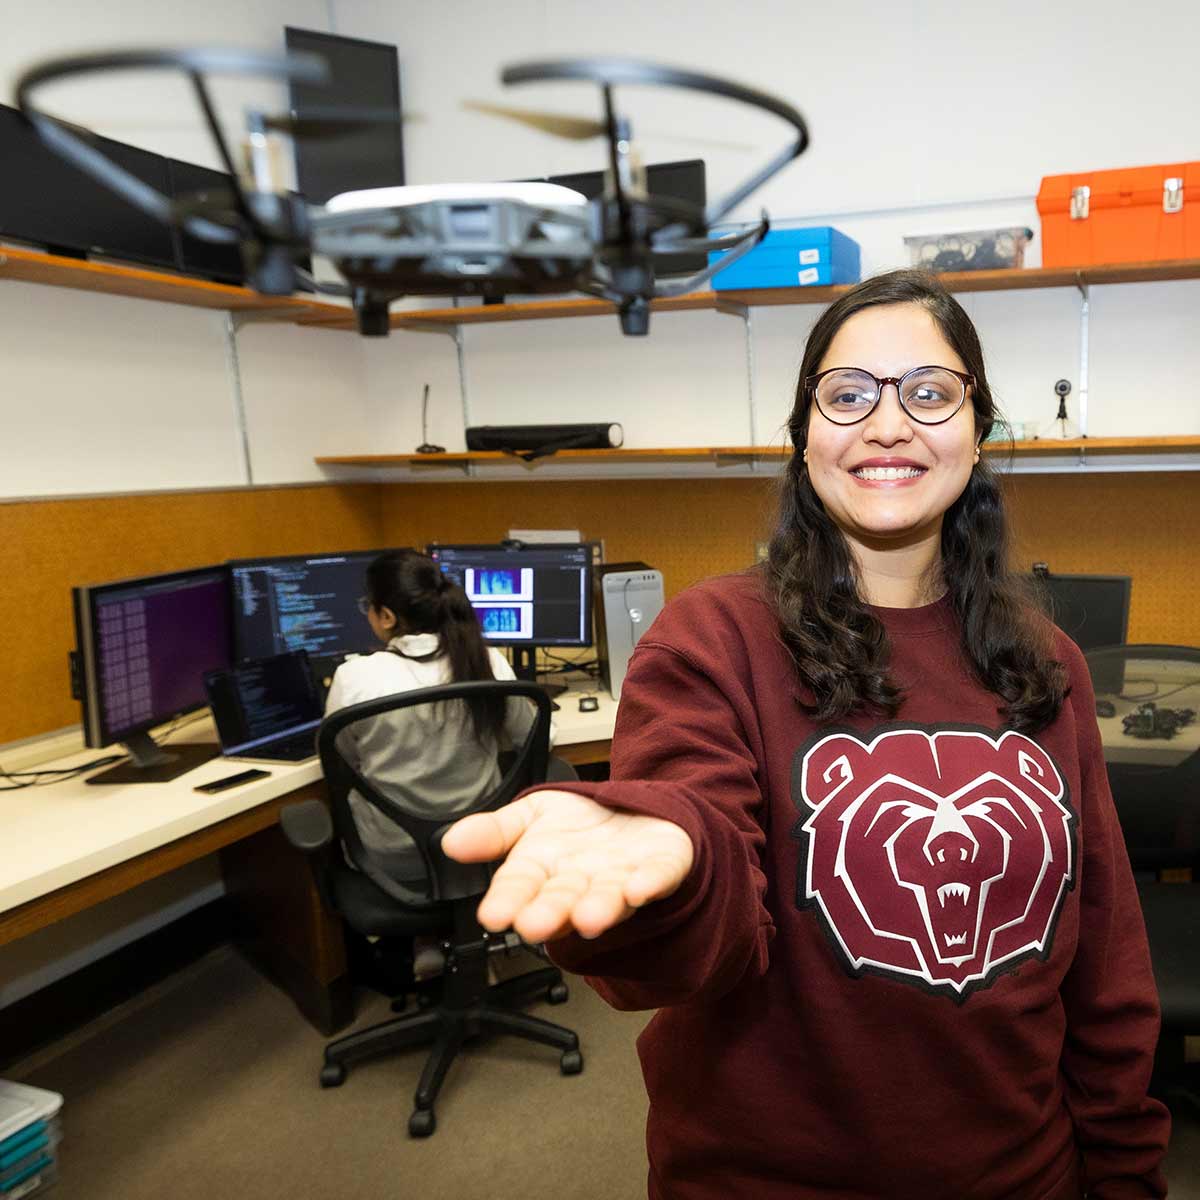 Jeniya Sultana holds up a drone for take-off in a computer science research lab